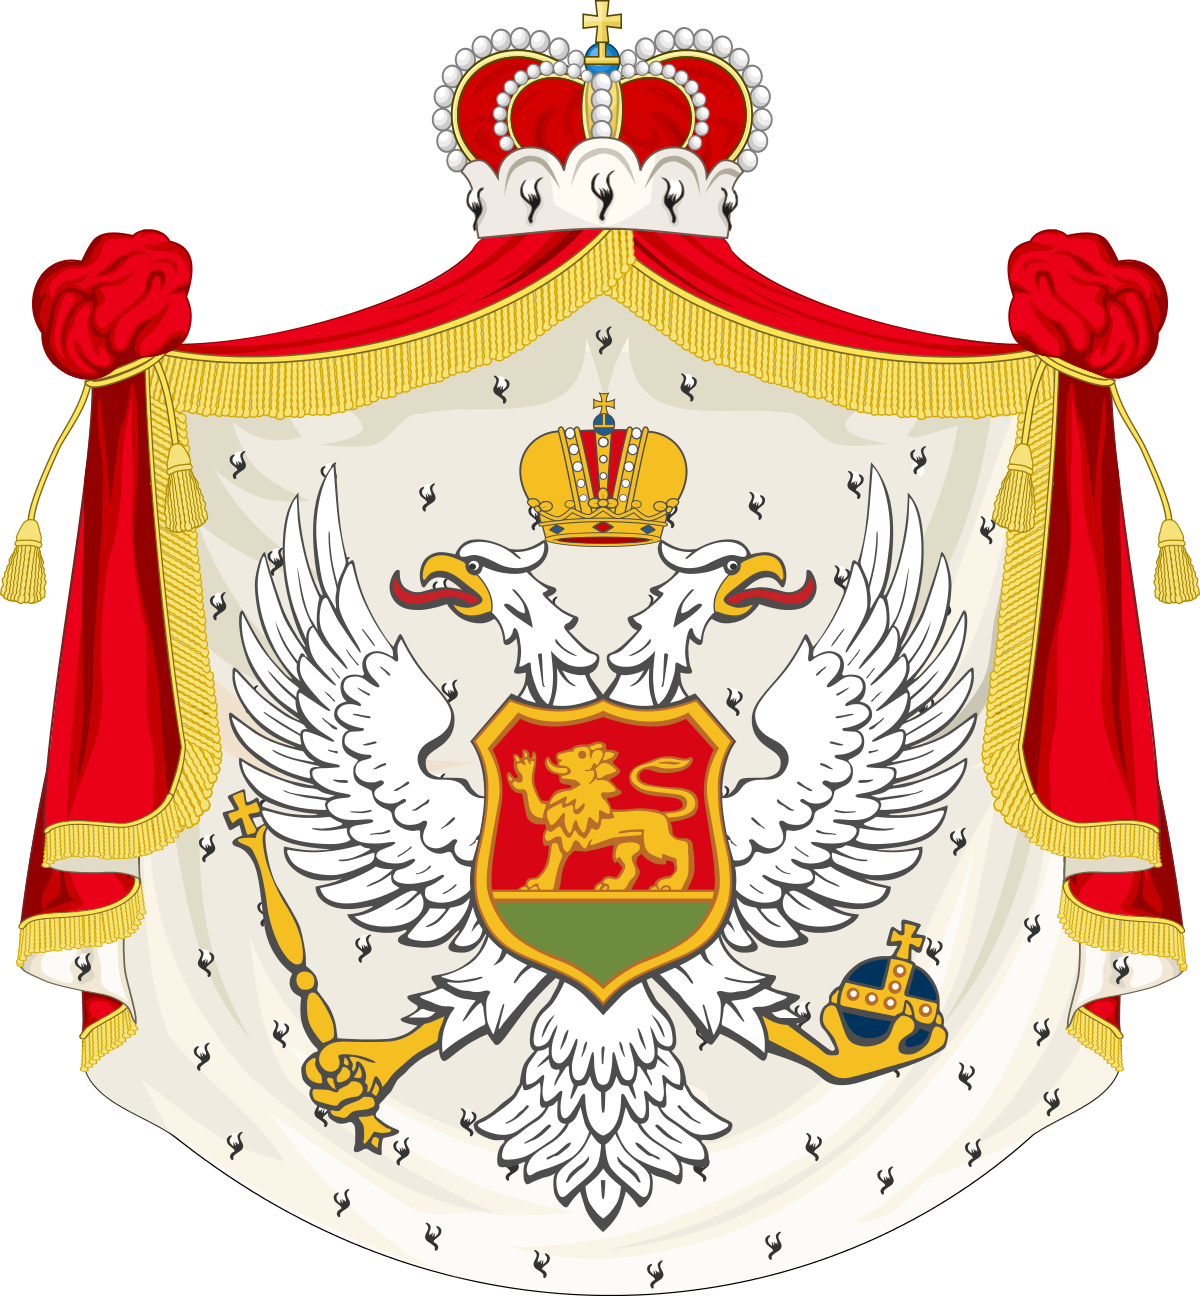 A Red And White Banner With A Crown And A White Eagle With A Crown